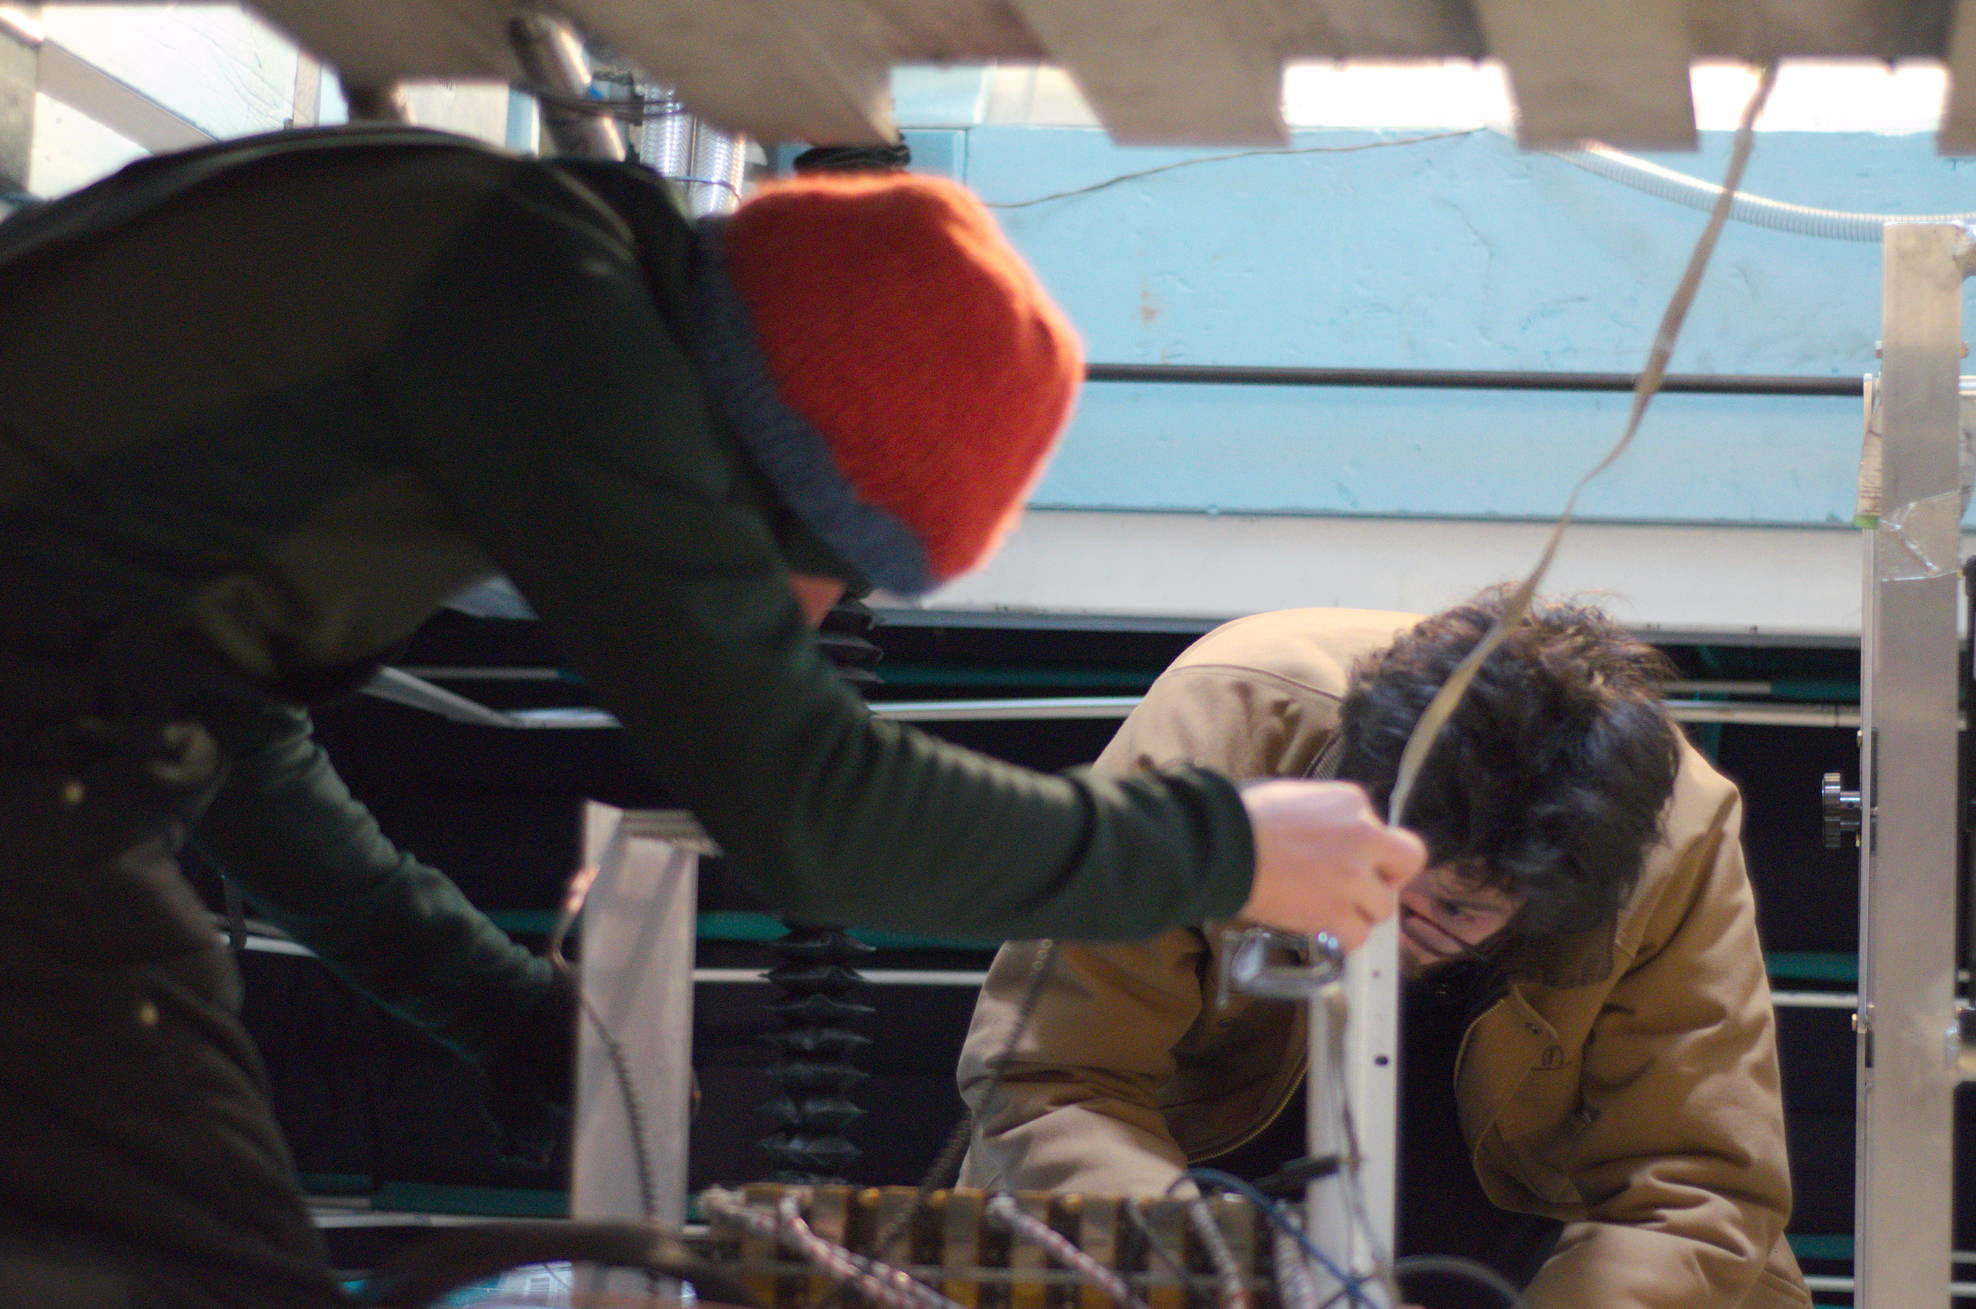 The winterovers (me and Andrew) working on test equipment underneath the receiver.